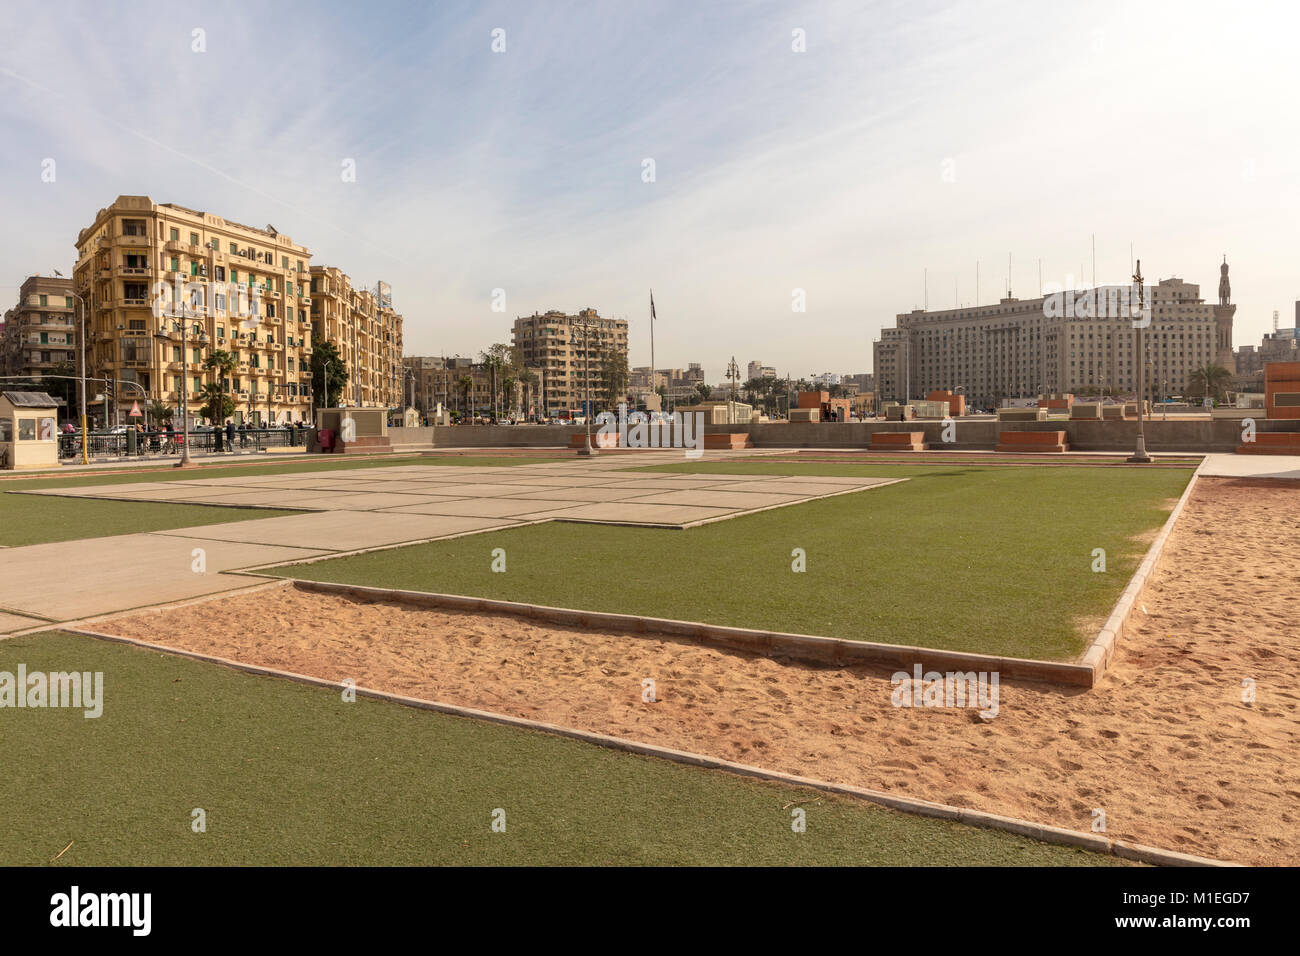 Tahrir Square, site of Arab Spring demonstrations in central Cairo, Egypt Stock Photo